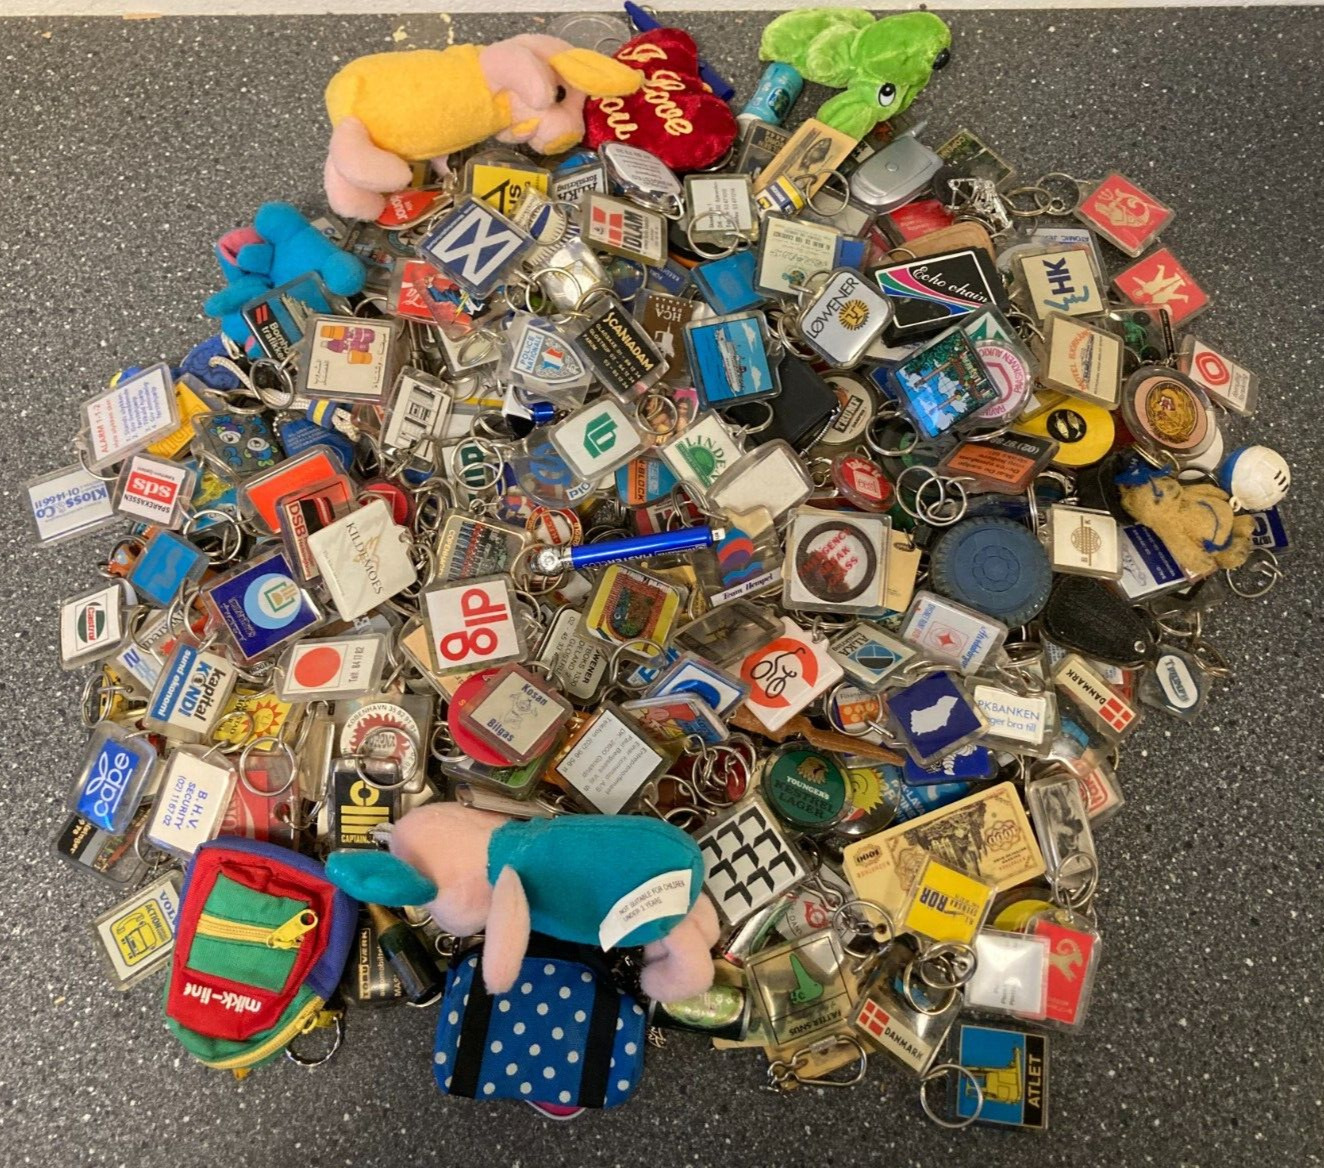 Vintage Danish Key Ring Collection 300+ Assorted Advertising Keychains - 4.5 kg